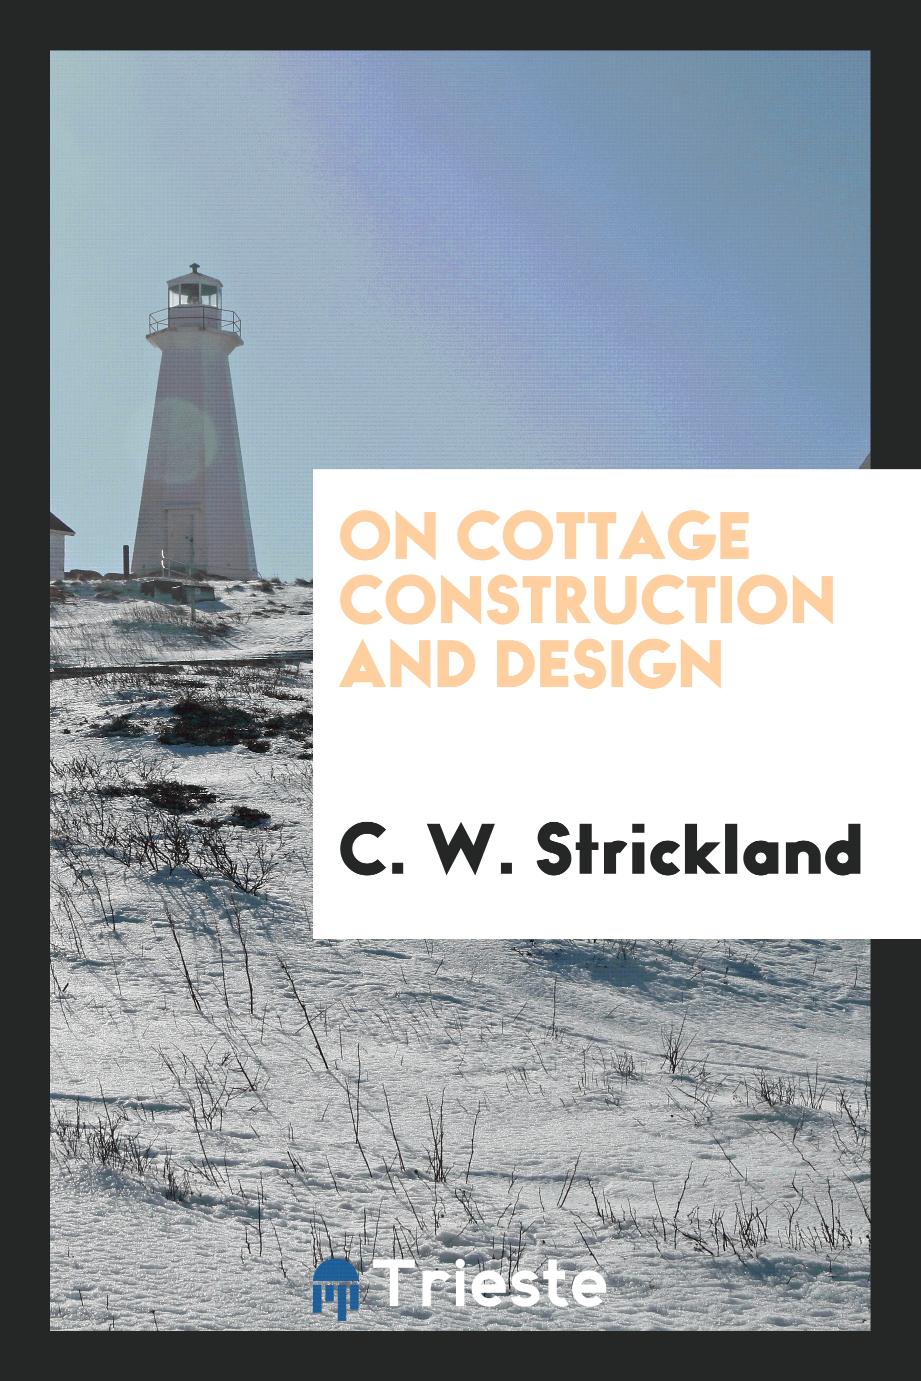 On Cottage Construction and Design